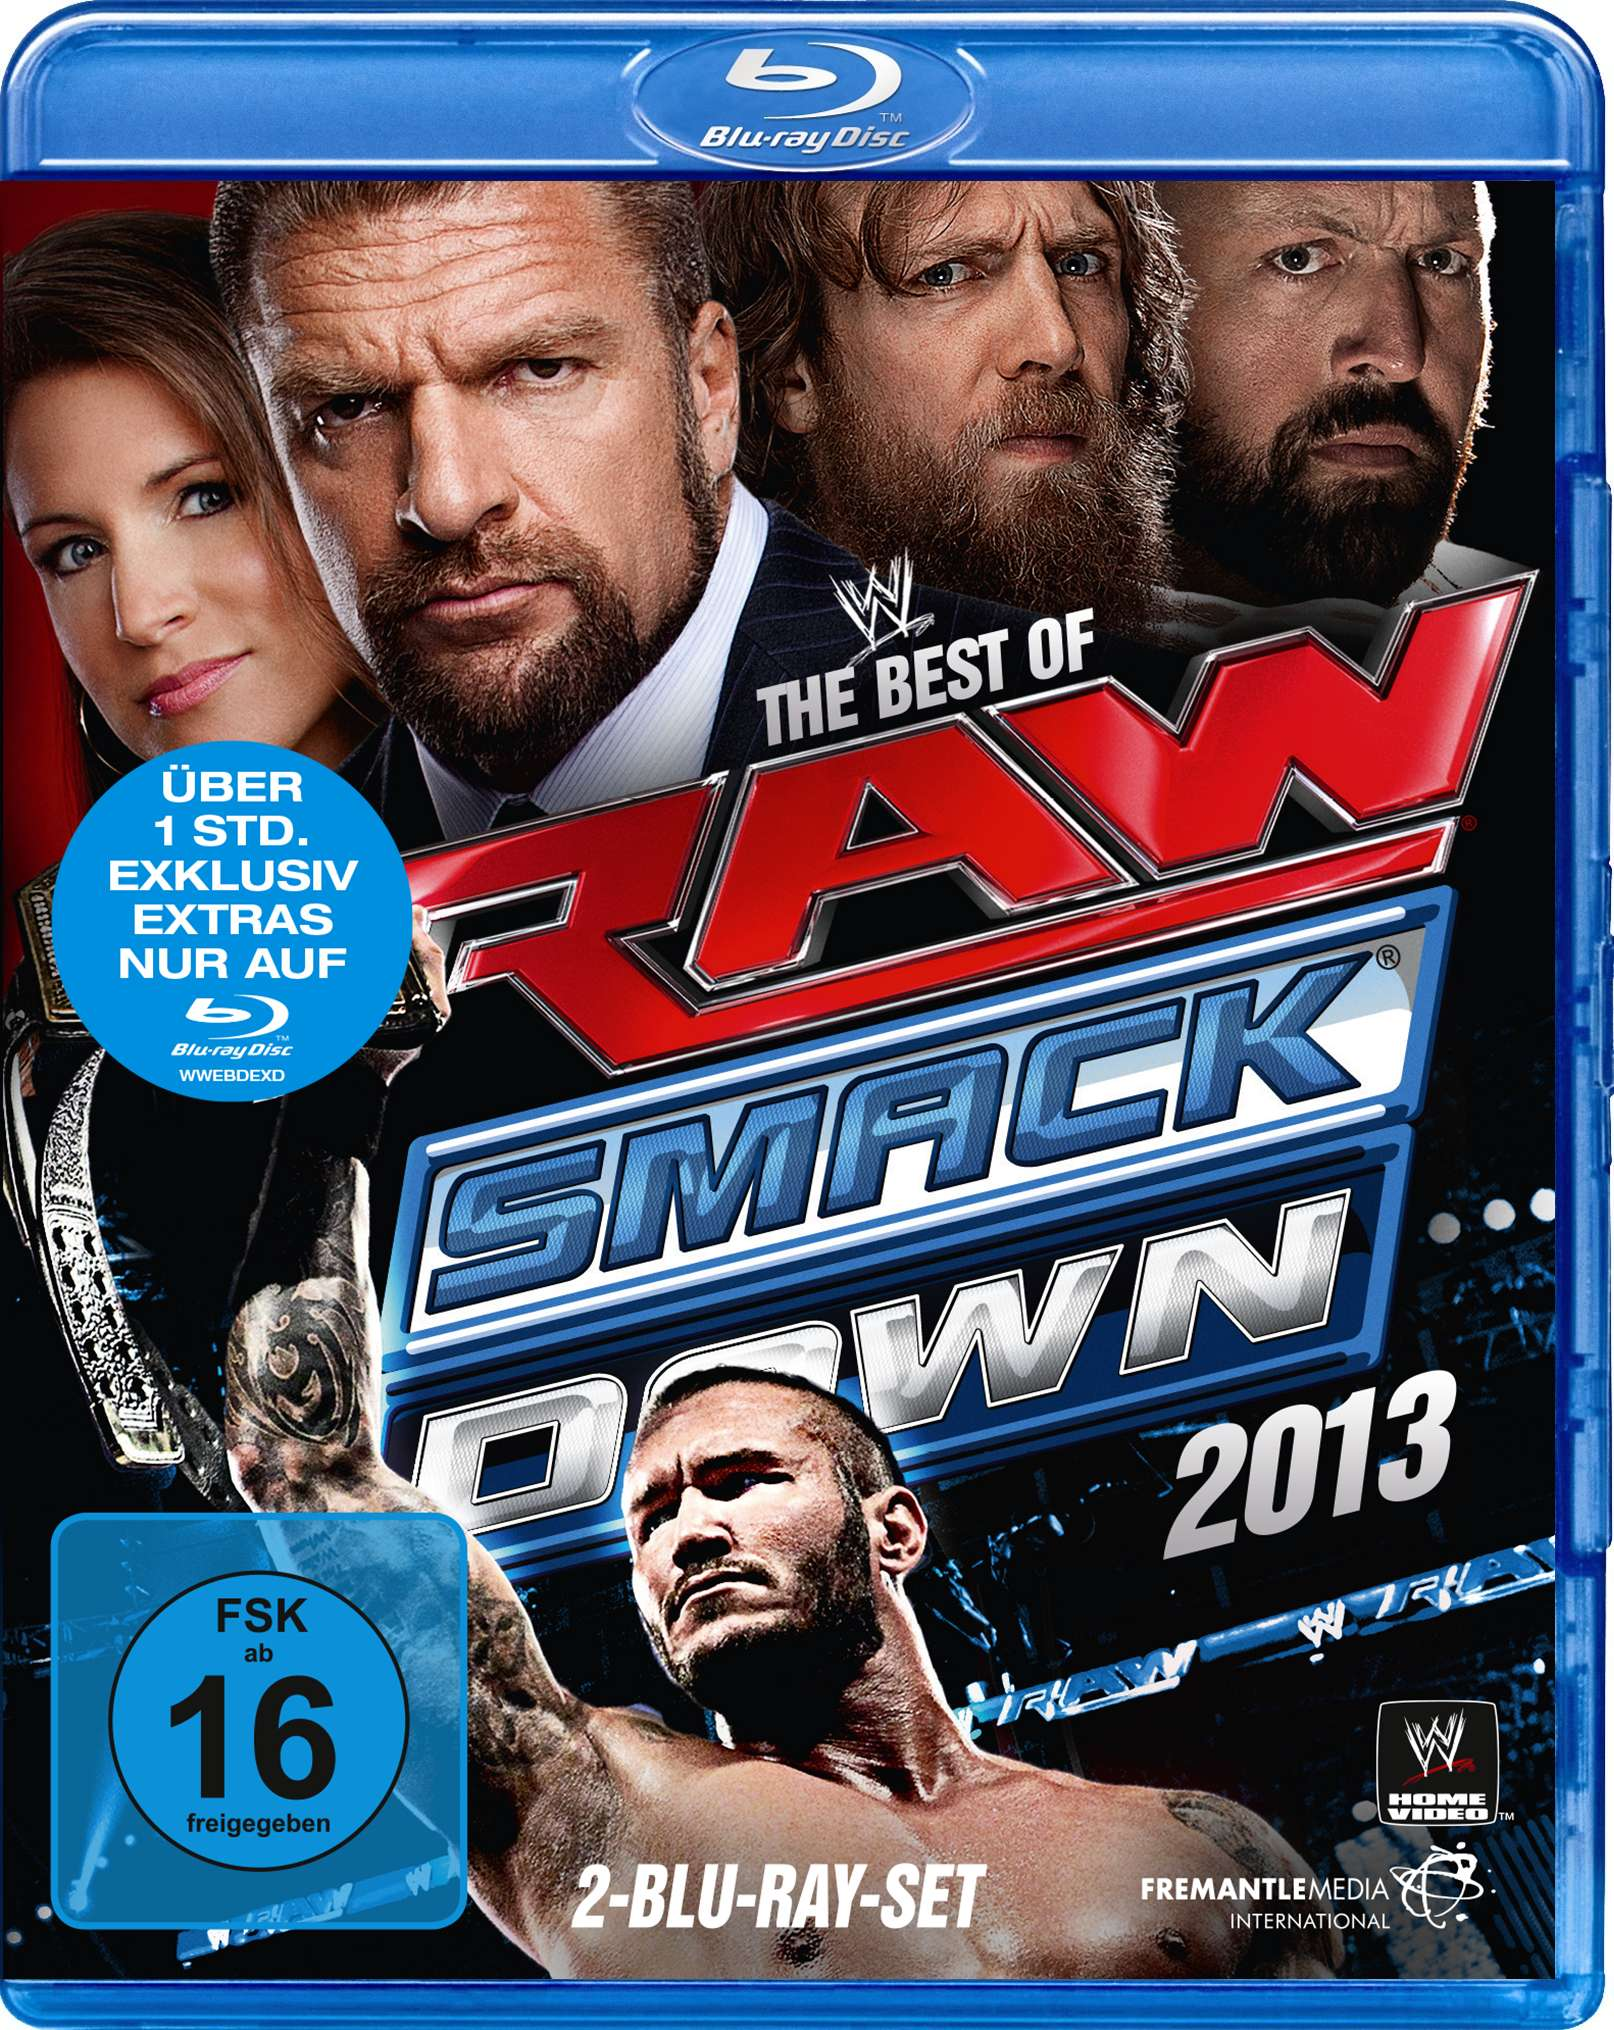 The Best & Blu-ray 2013 Of Smackdown Raw